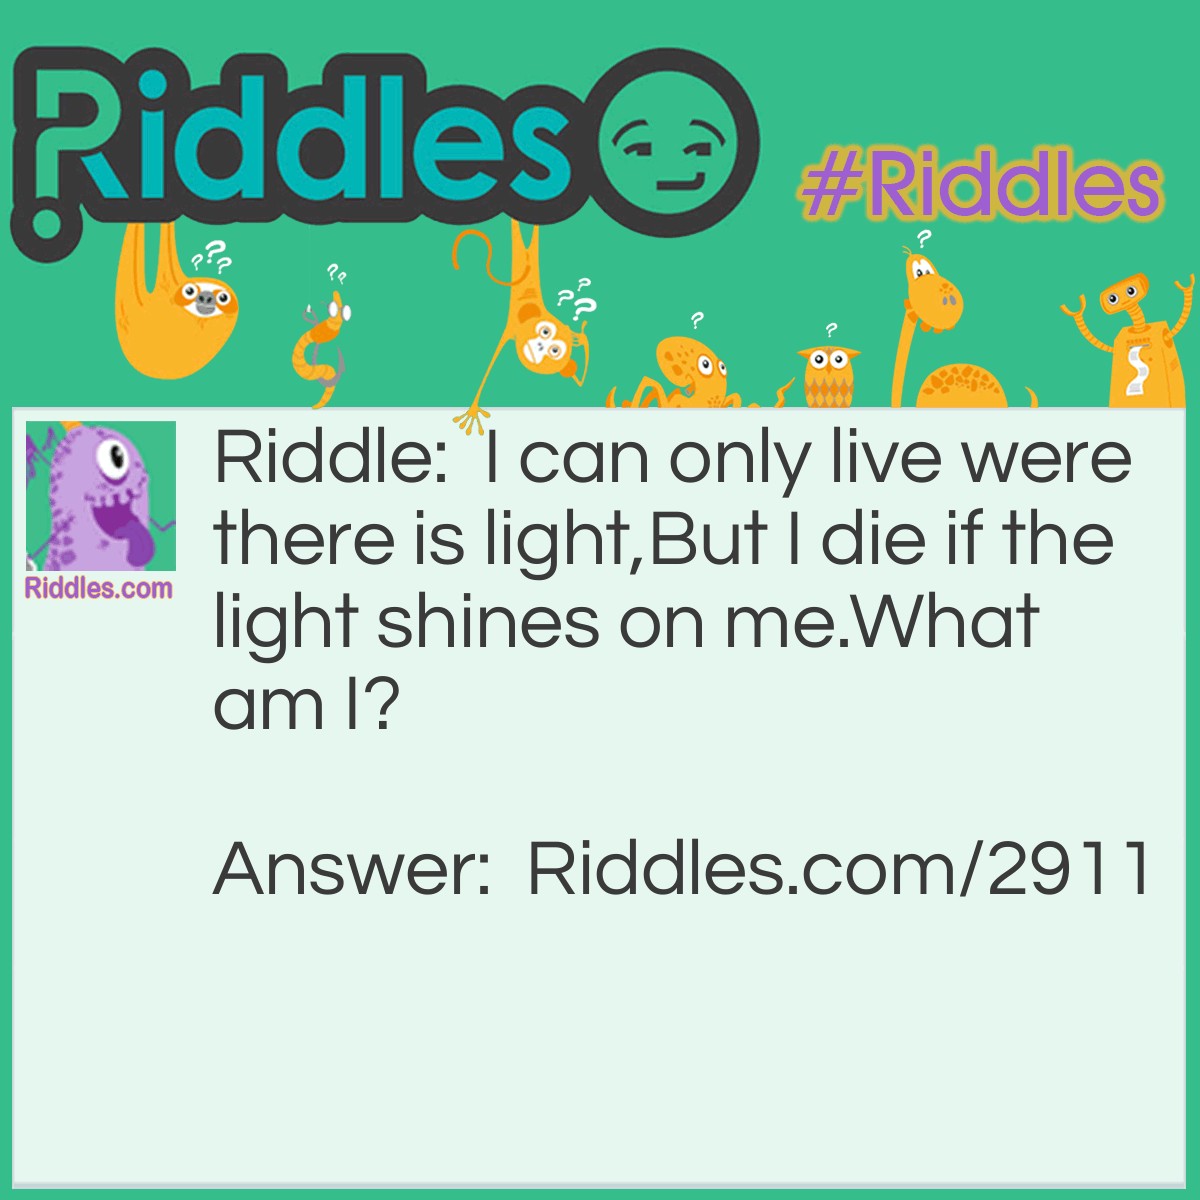 Riddle: Tall I am young, Short I am old, While with life I glow, Wind is my foe. What am I? Answer: A candle.